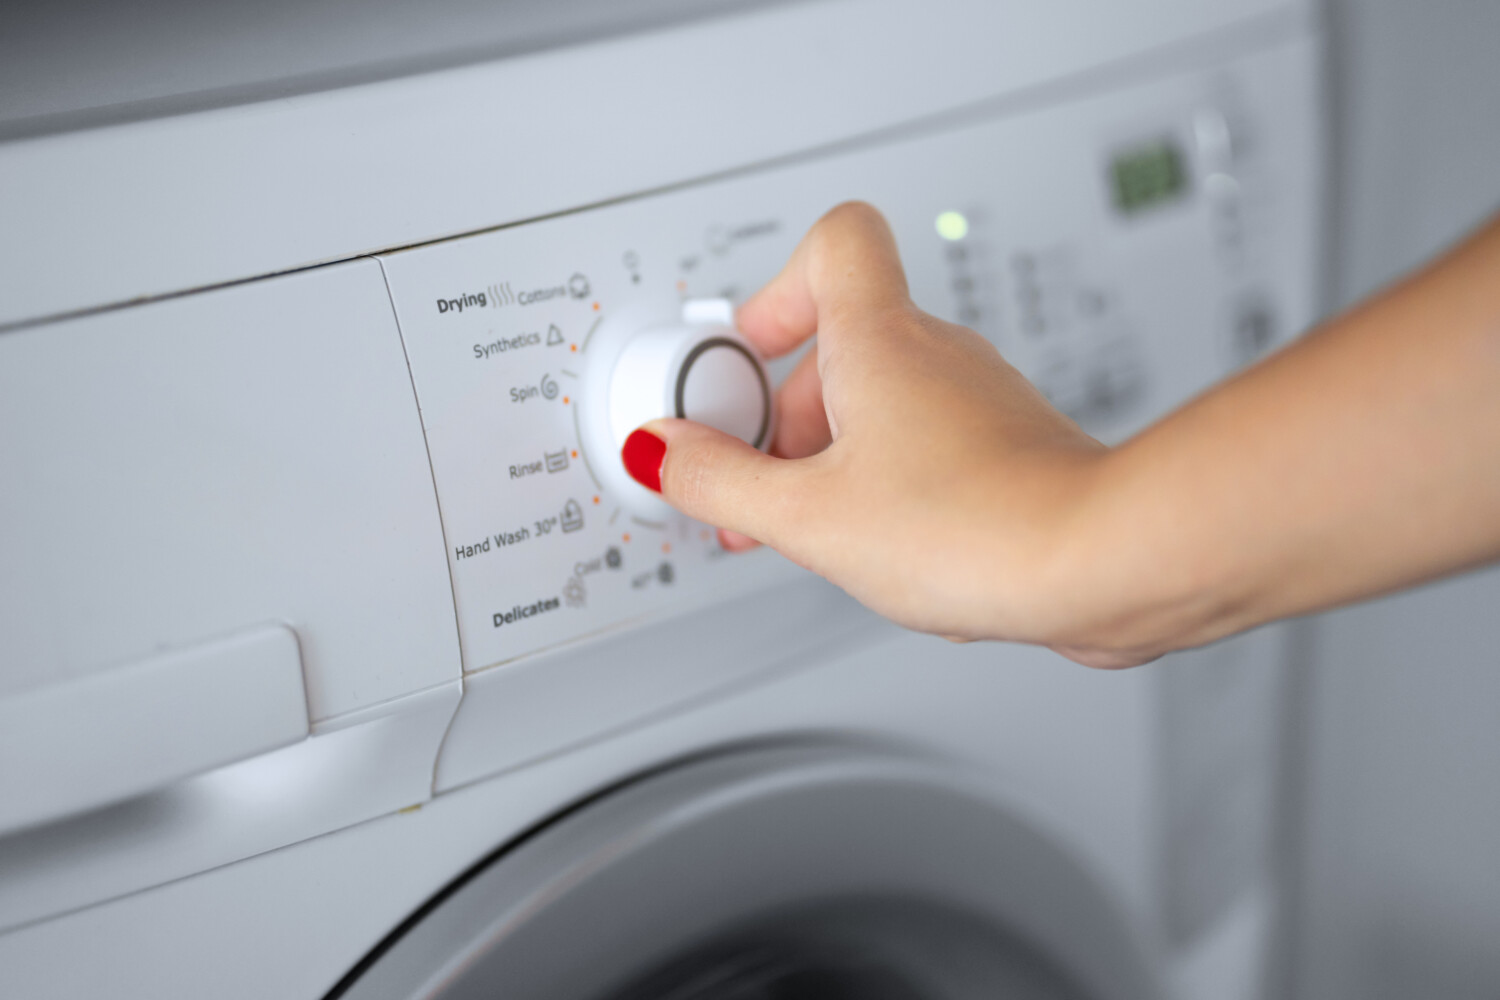 How to Hand-Wash and Sanitize Clothes at Home